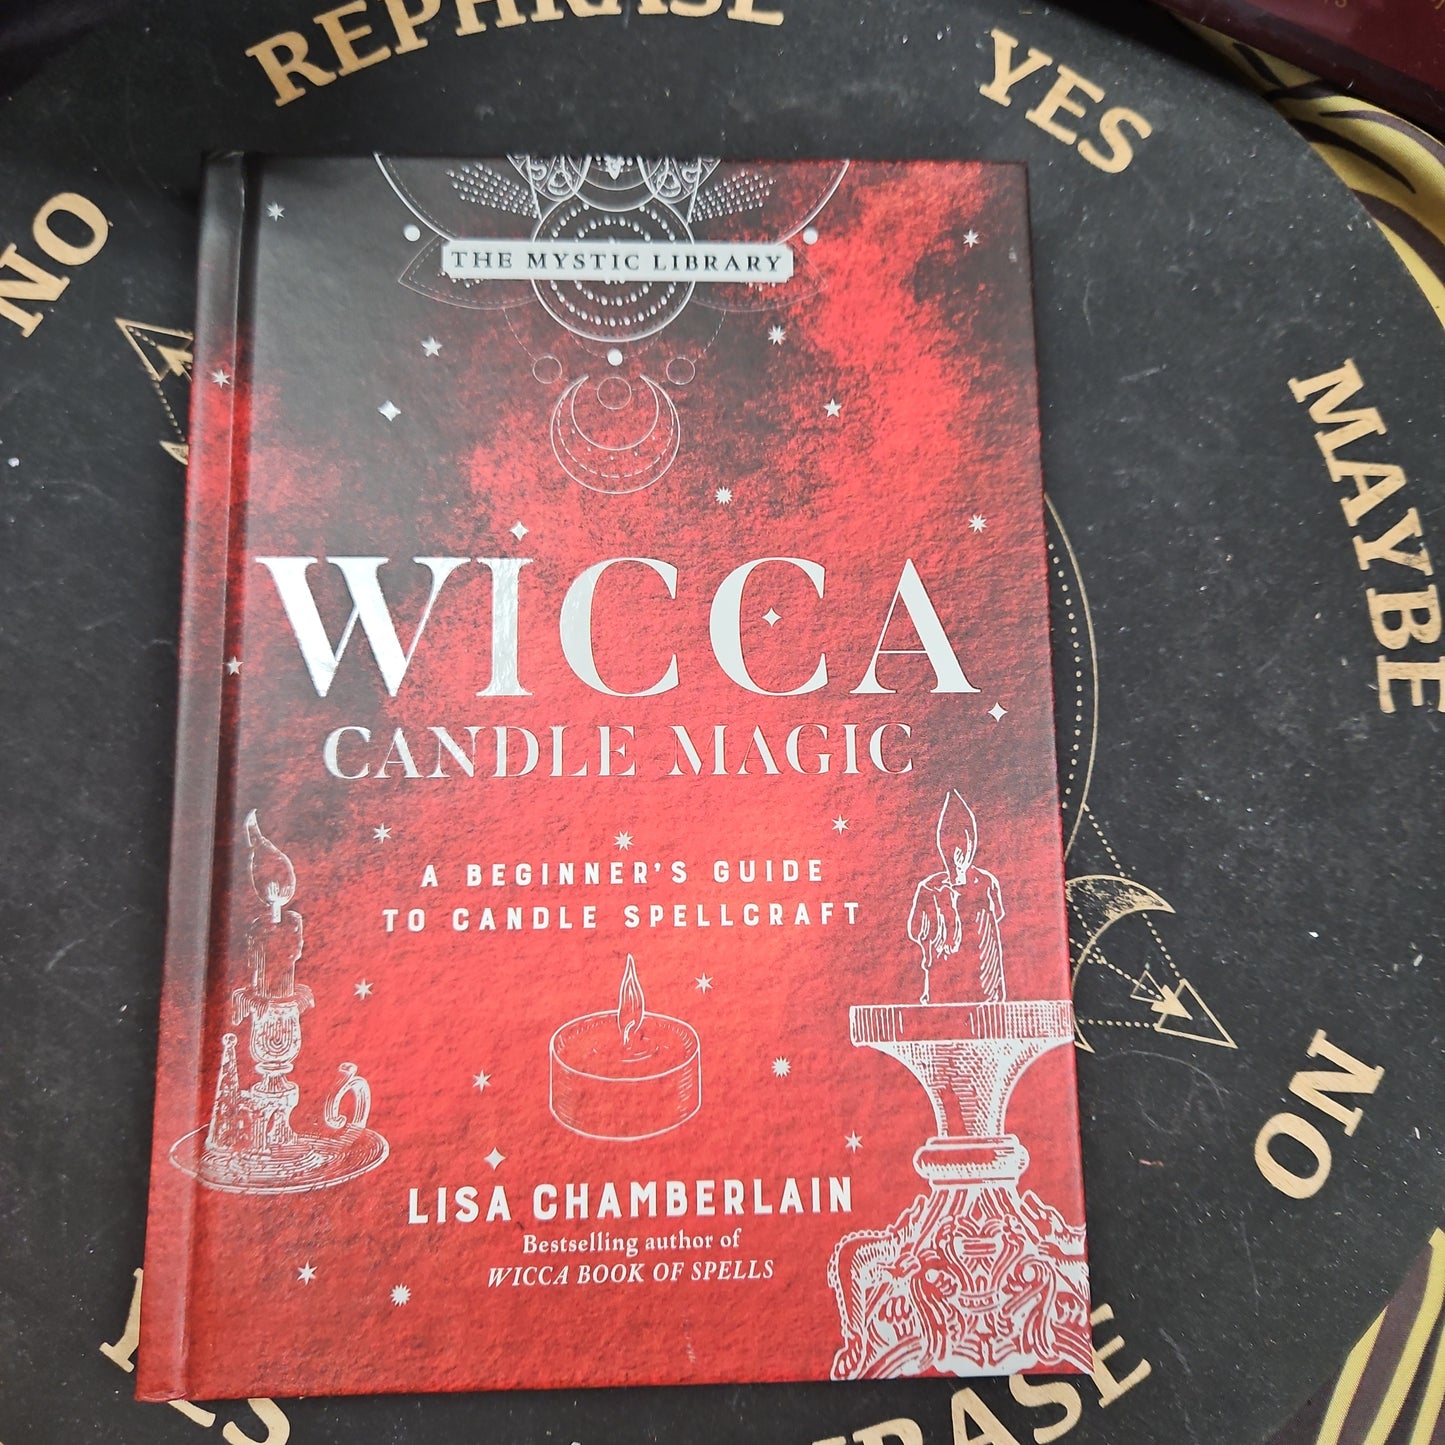 Wicca Candle Magic: A Beginner's Guide By Lisa Chamberlain